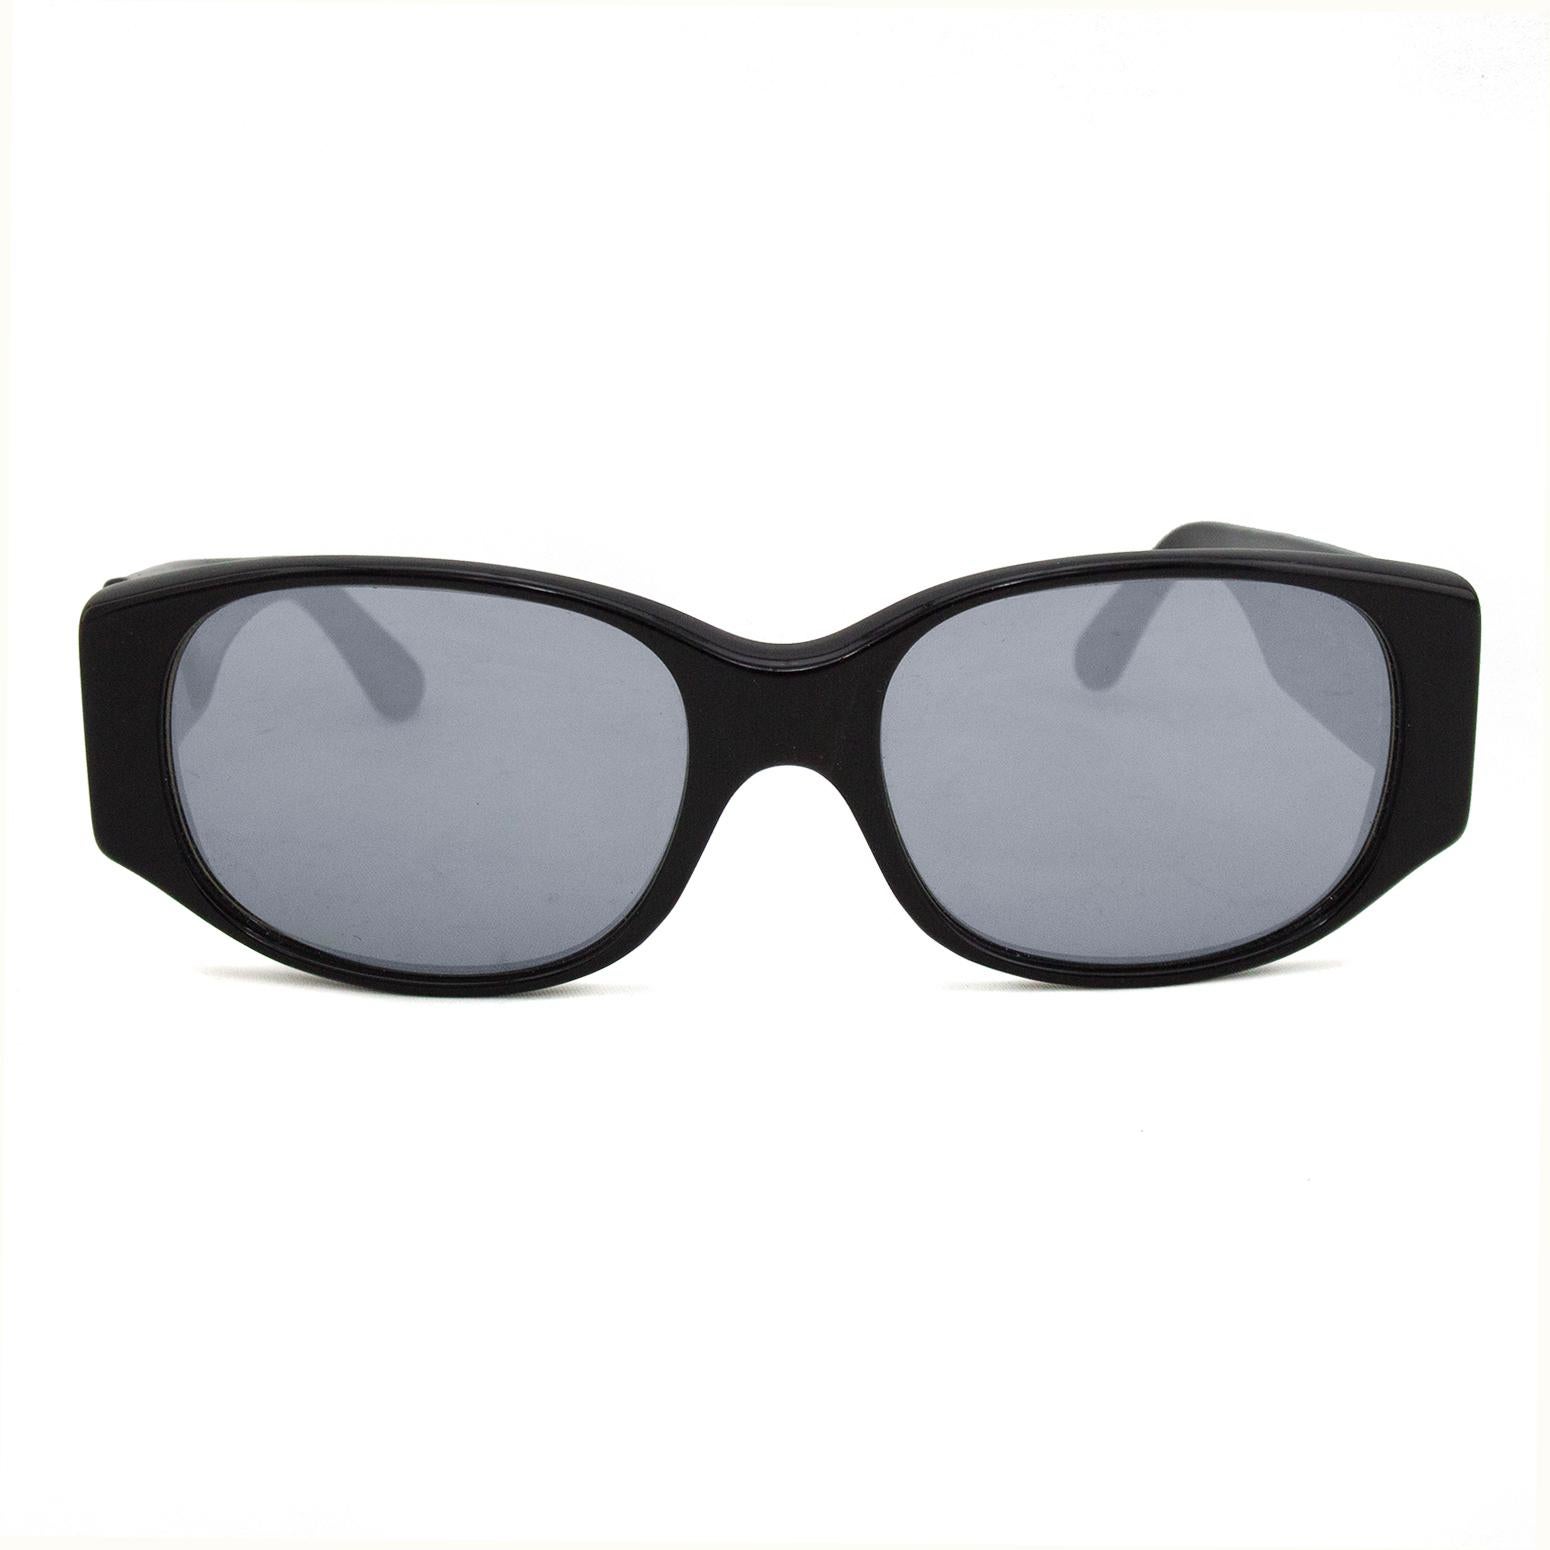 Alain Mikli Black Sunglasses with Mirror Lenses In Good Condition For Sale In Toronto, Ontario